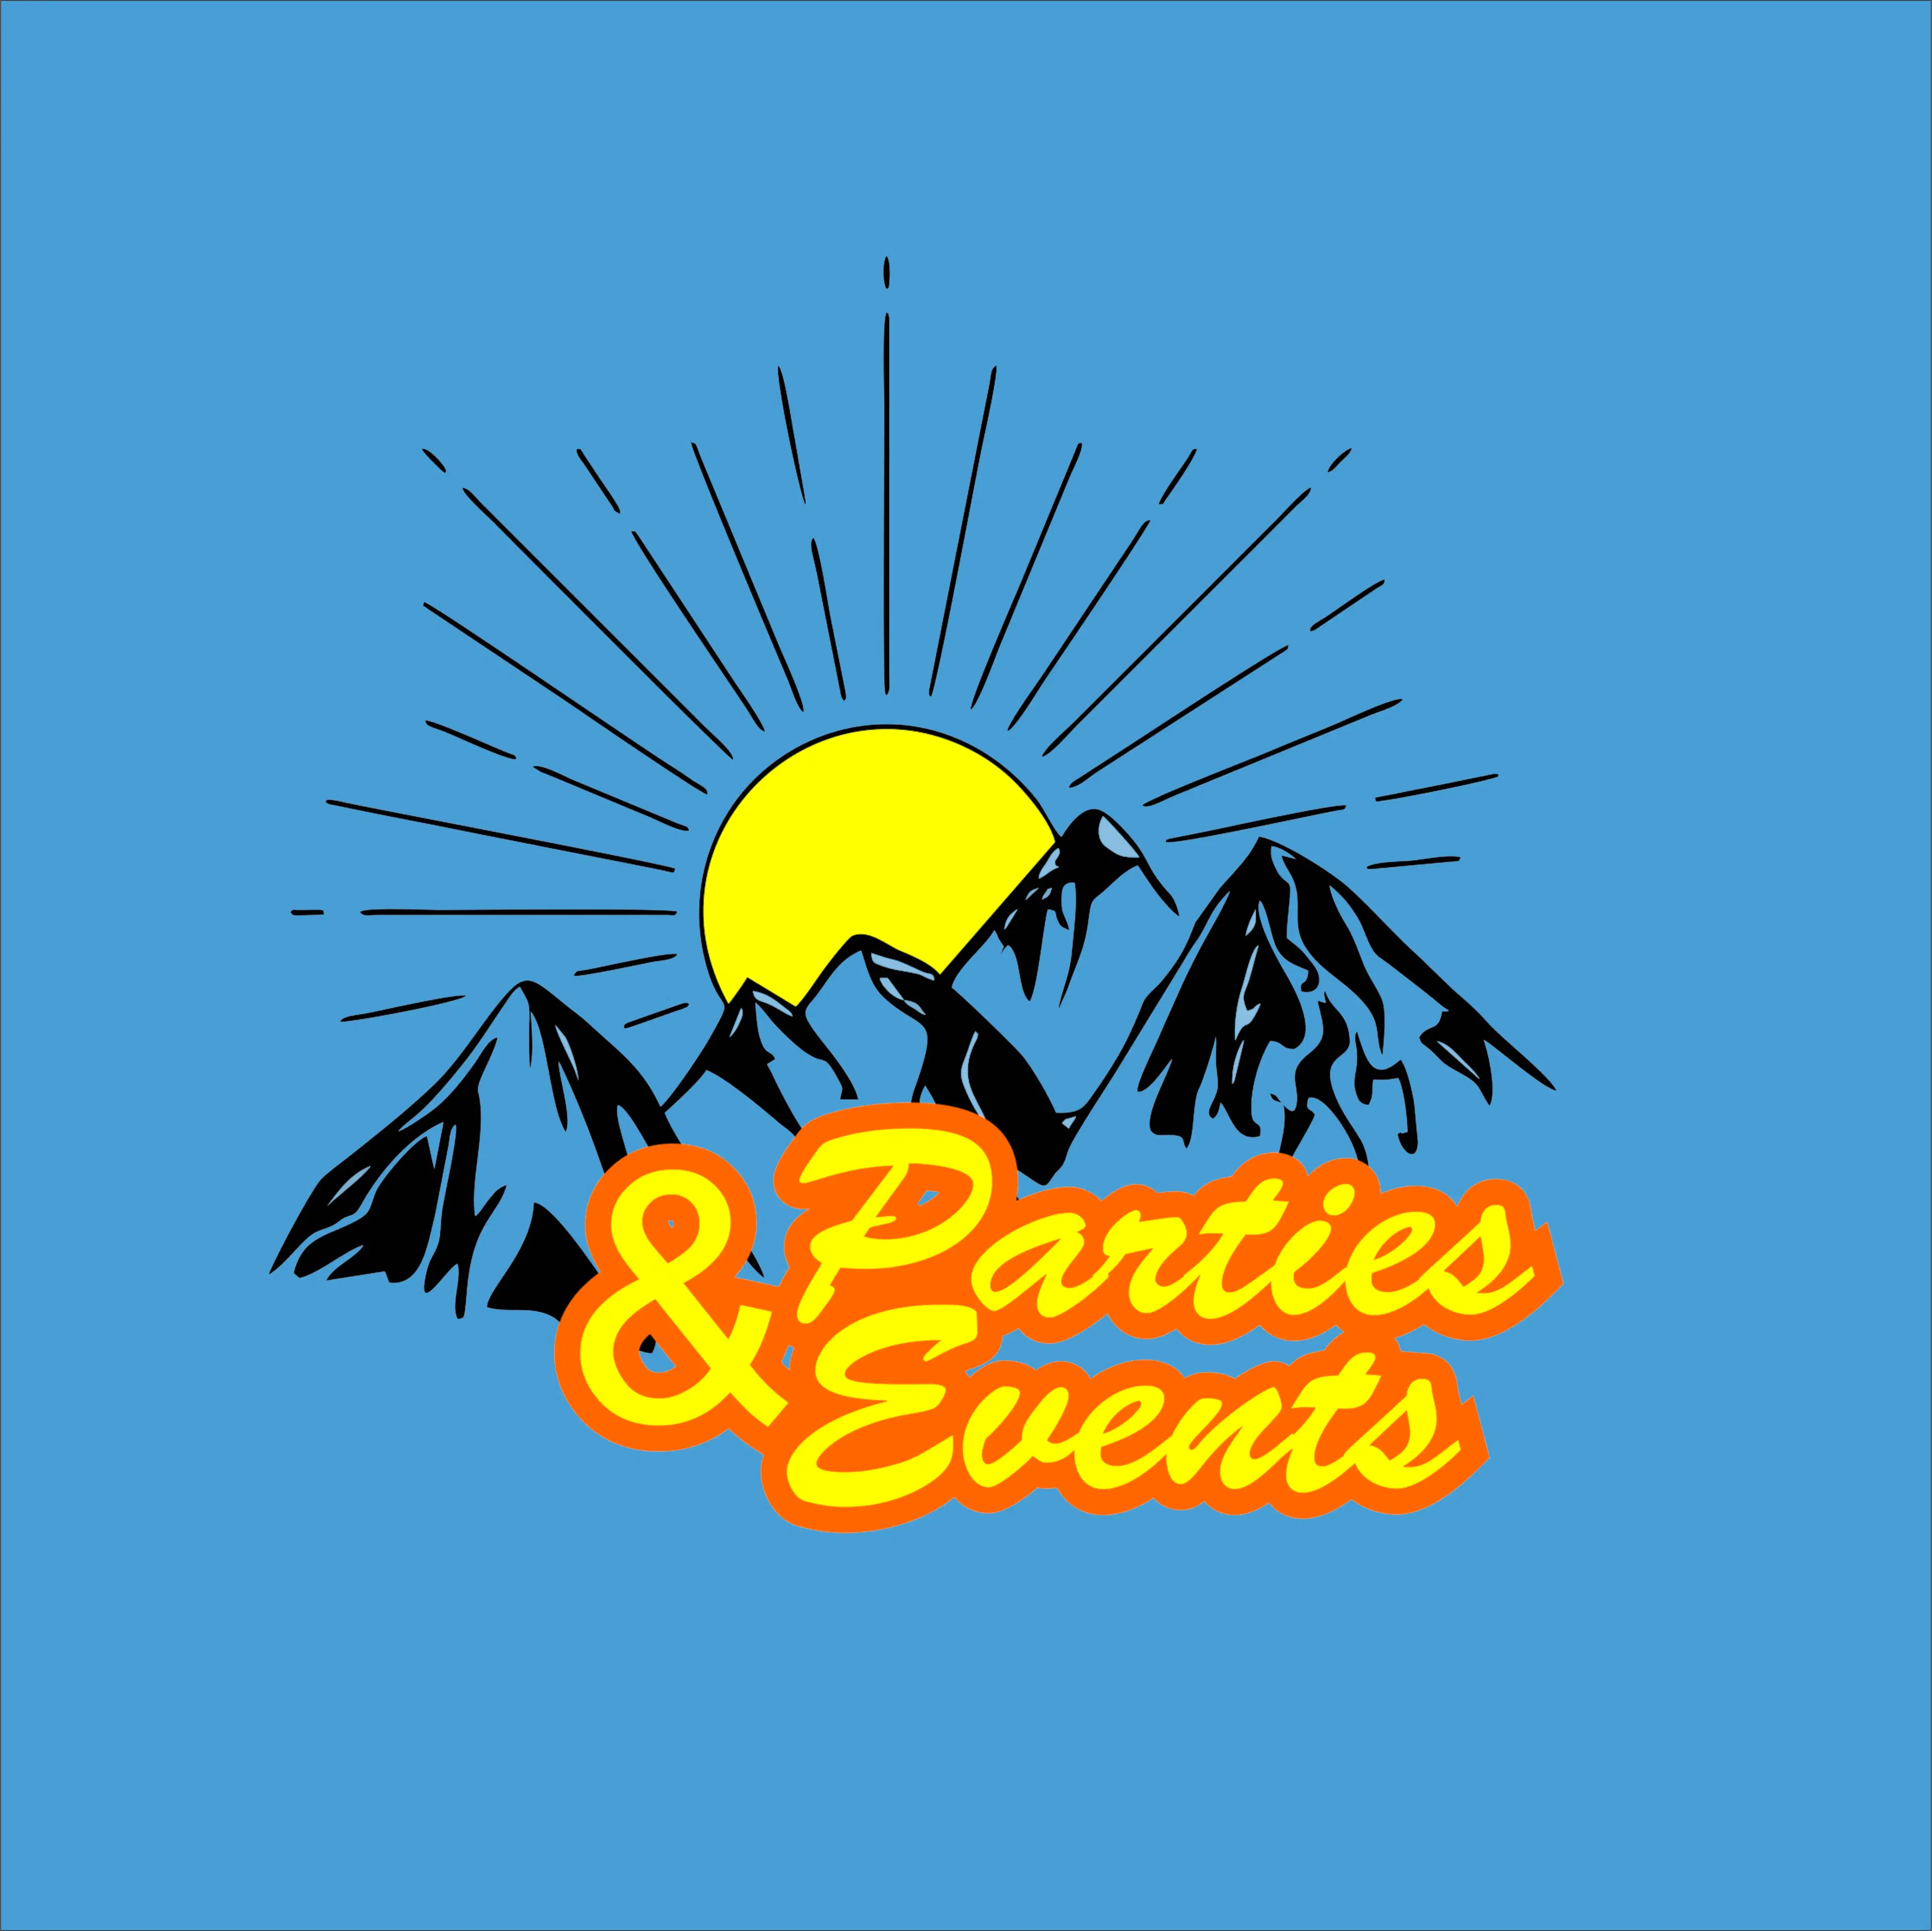 Parties & Events